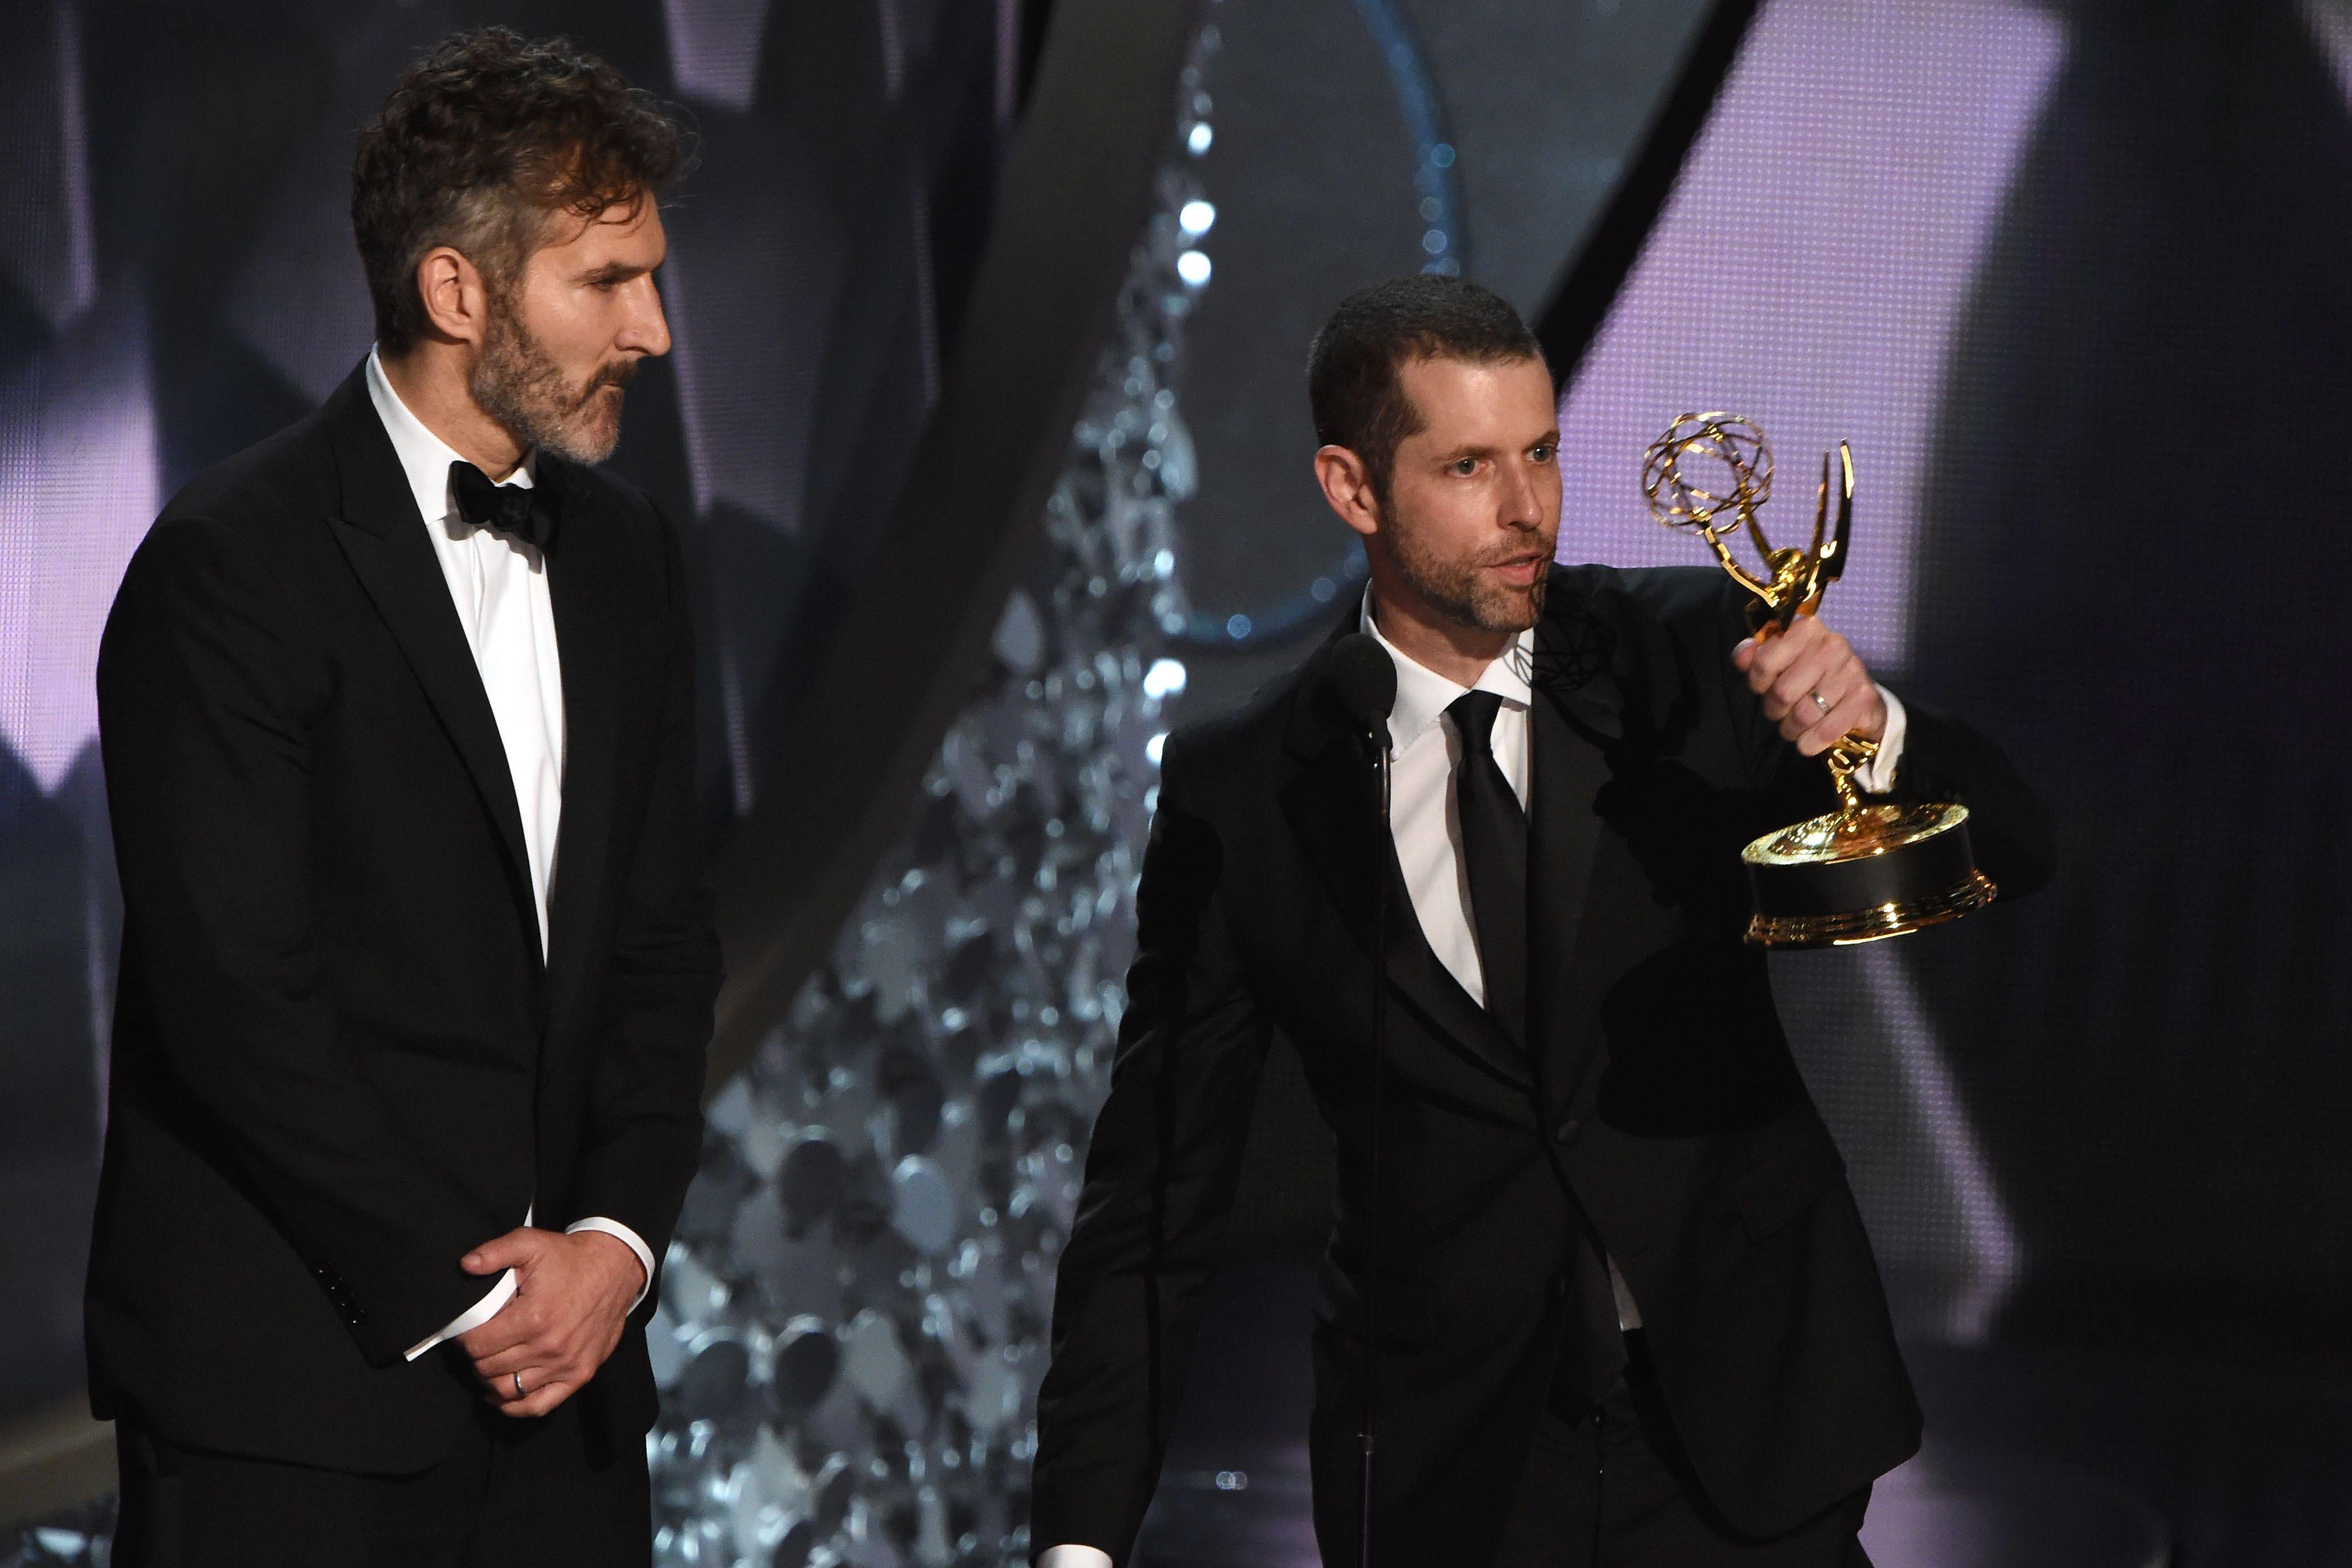 Writer/producers David Benioff (L) and D.B. Weiss accept the Outstanding Writing for a Drama Series for 'Game of Thrones' episode Battle of the Bastards during the 68th Emmy Awards show on September 18, 2016 at the Microsoft Theatre in downtown Los Angeles.  / AFP / Valerie MACON        (Photo credit should read VALERIE MACON/AFP/Getty Images)